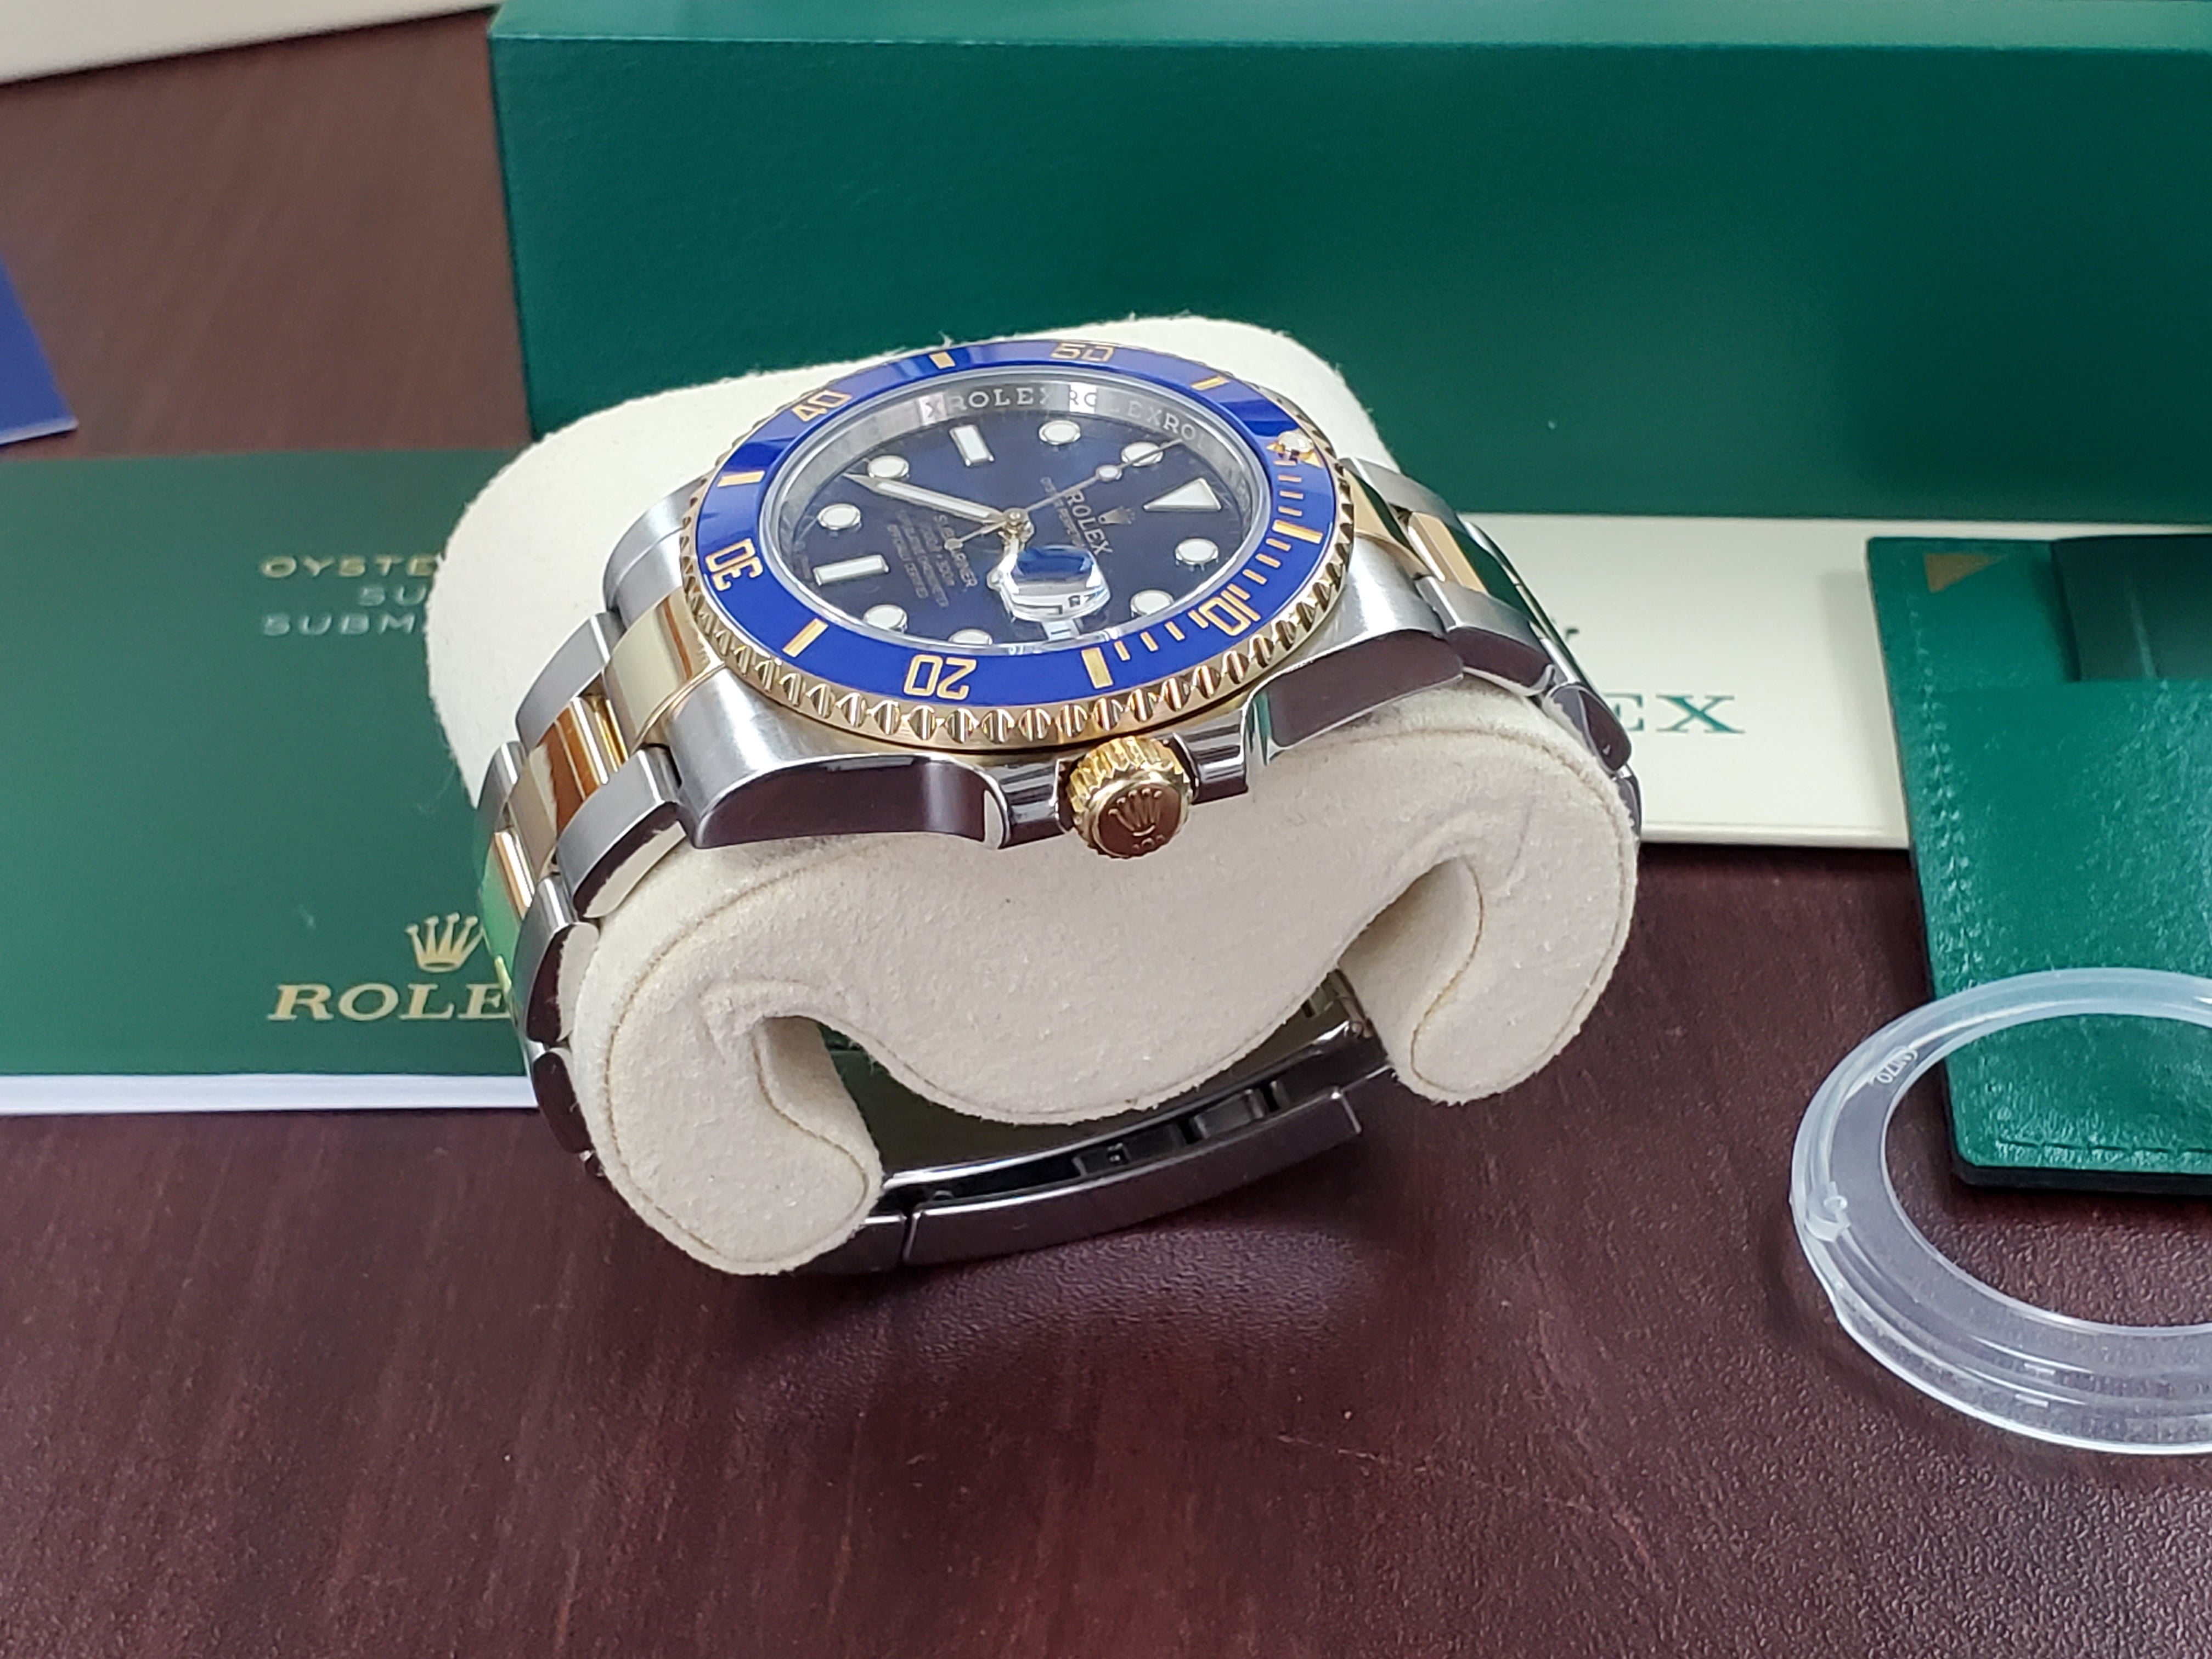 Rolex Discontinued SUB-40 Two Tone Submariner Date 116613BL Blue Dial Ceramic Bezel 18k Box Papers Full Set